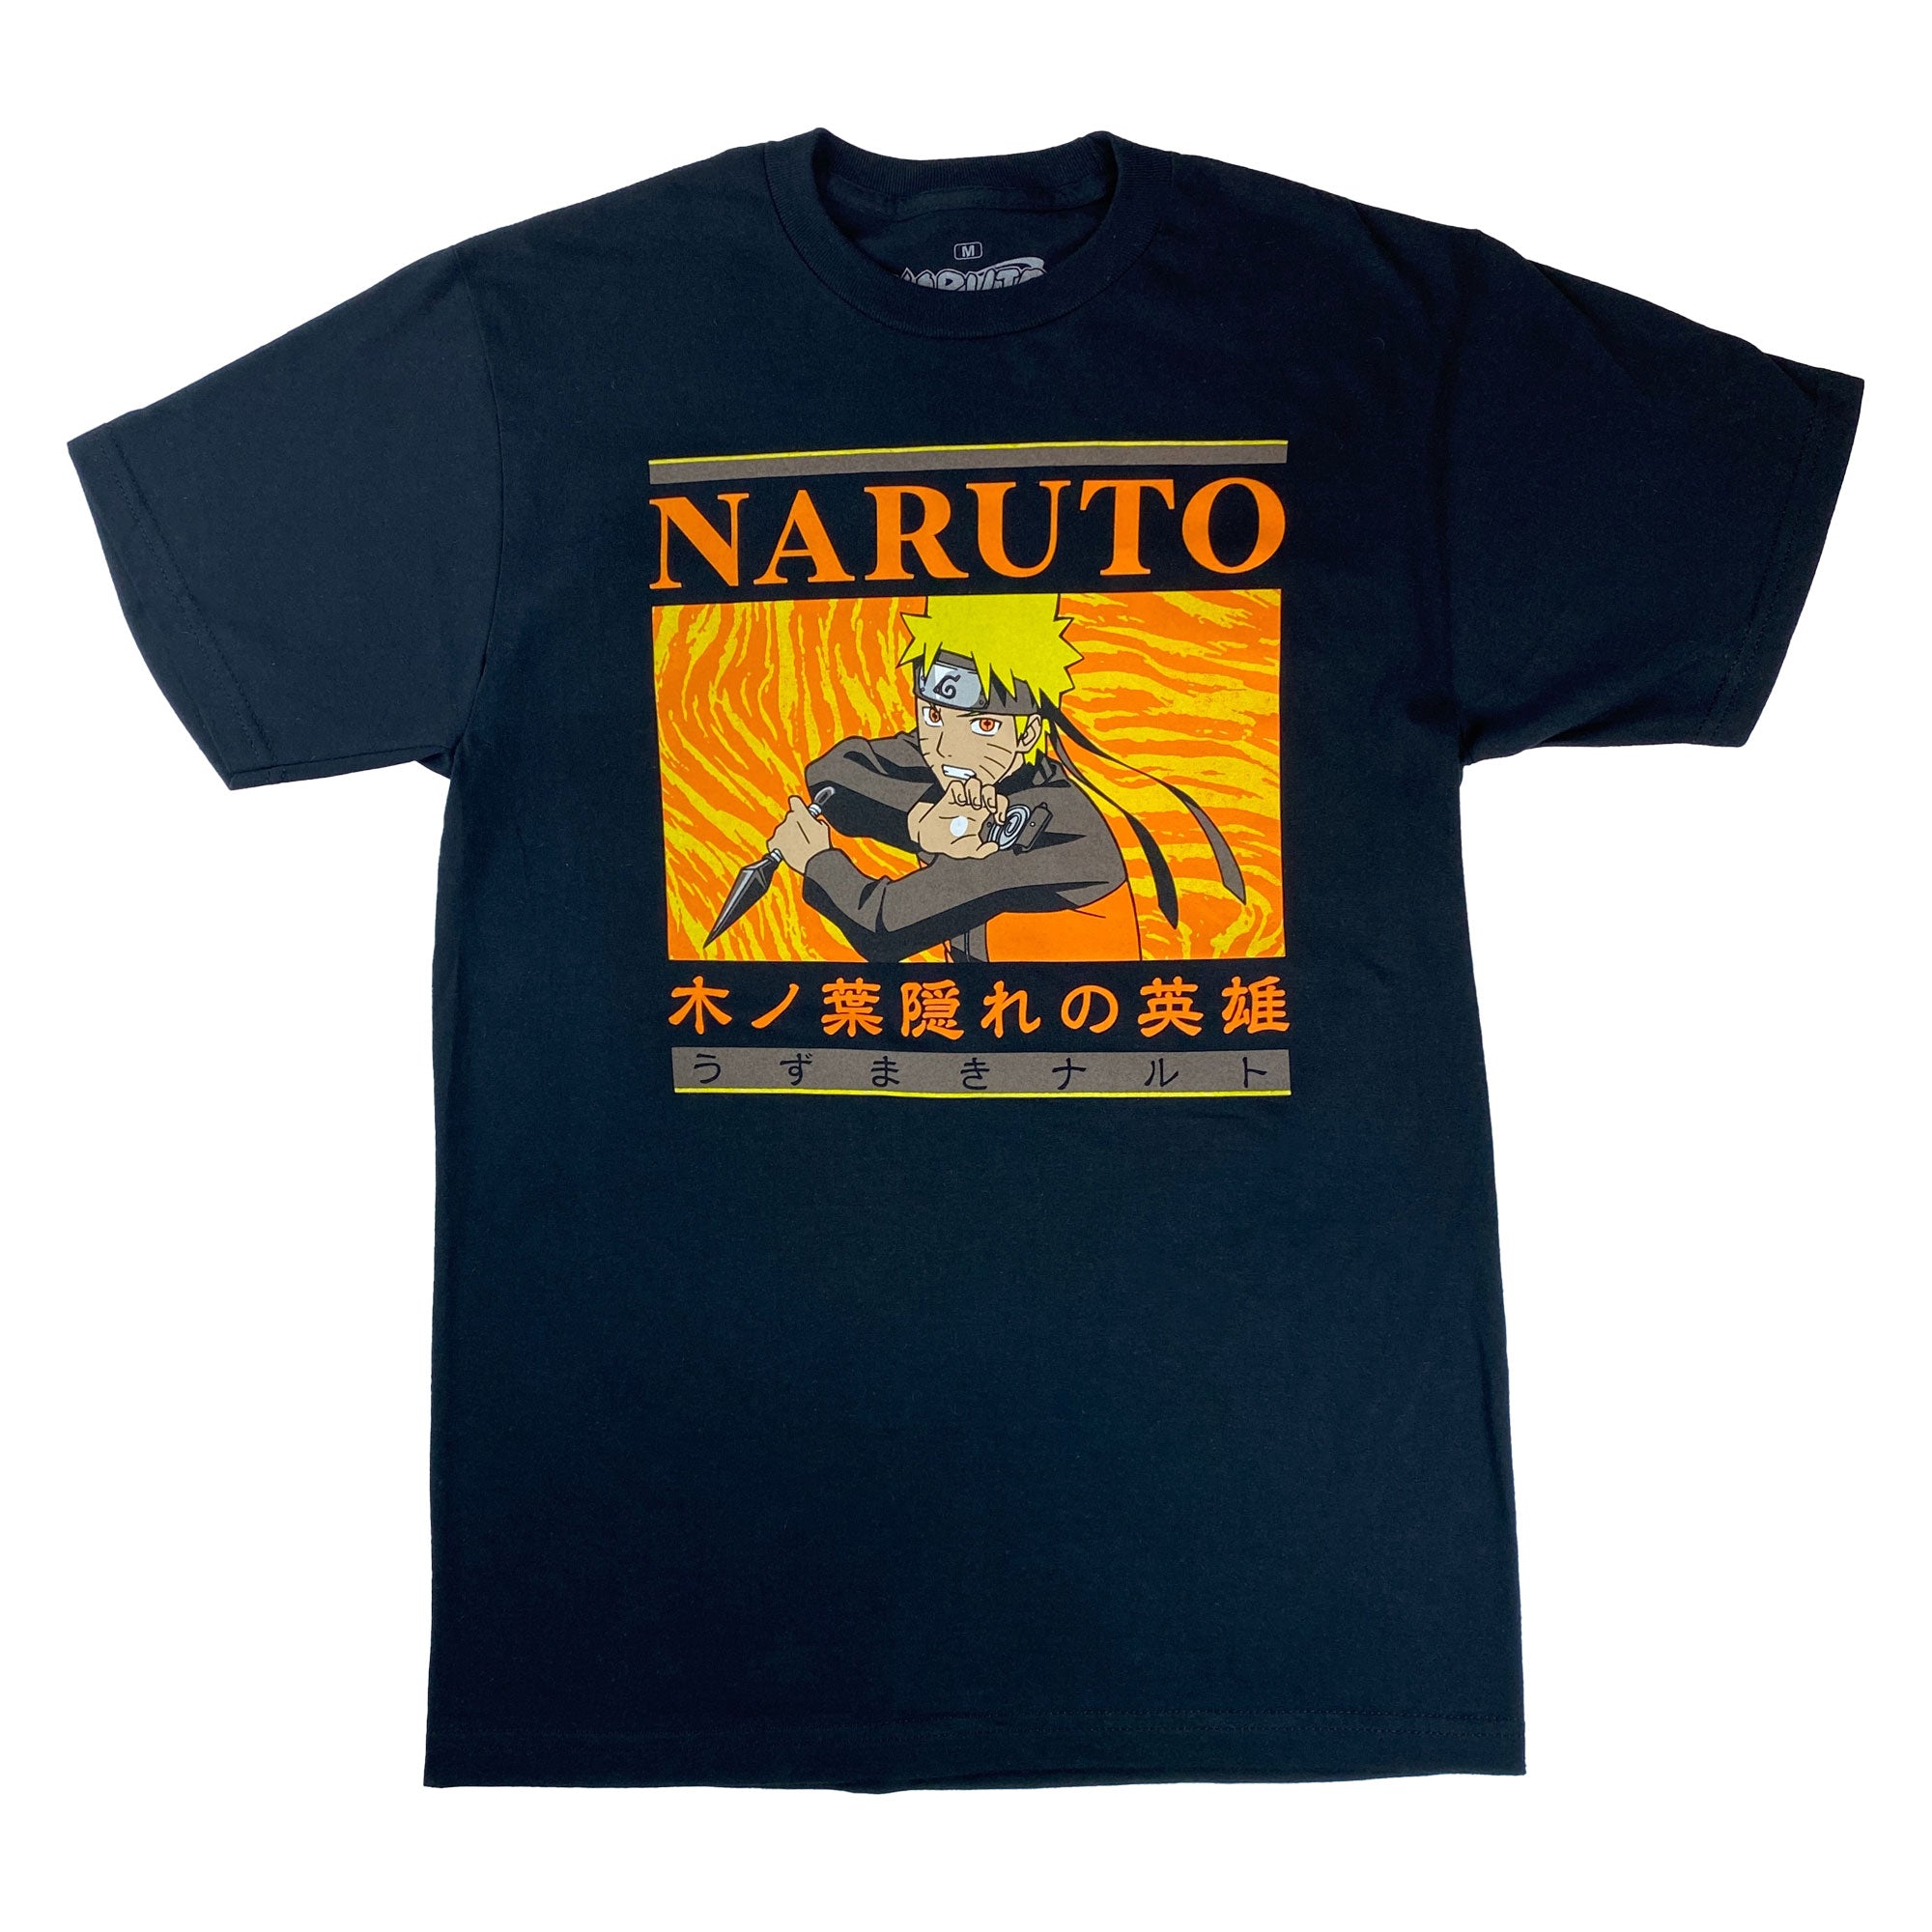 Naruto Shippuden - Naruto Hero Of The Hidden Leaf T-Shirt - Crunchyroll Exclusive! image count 0